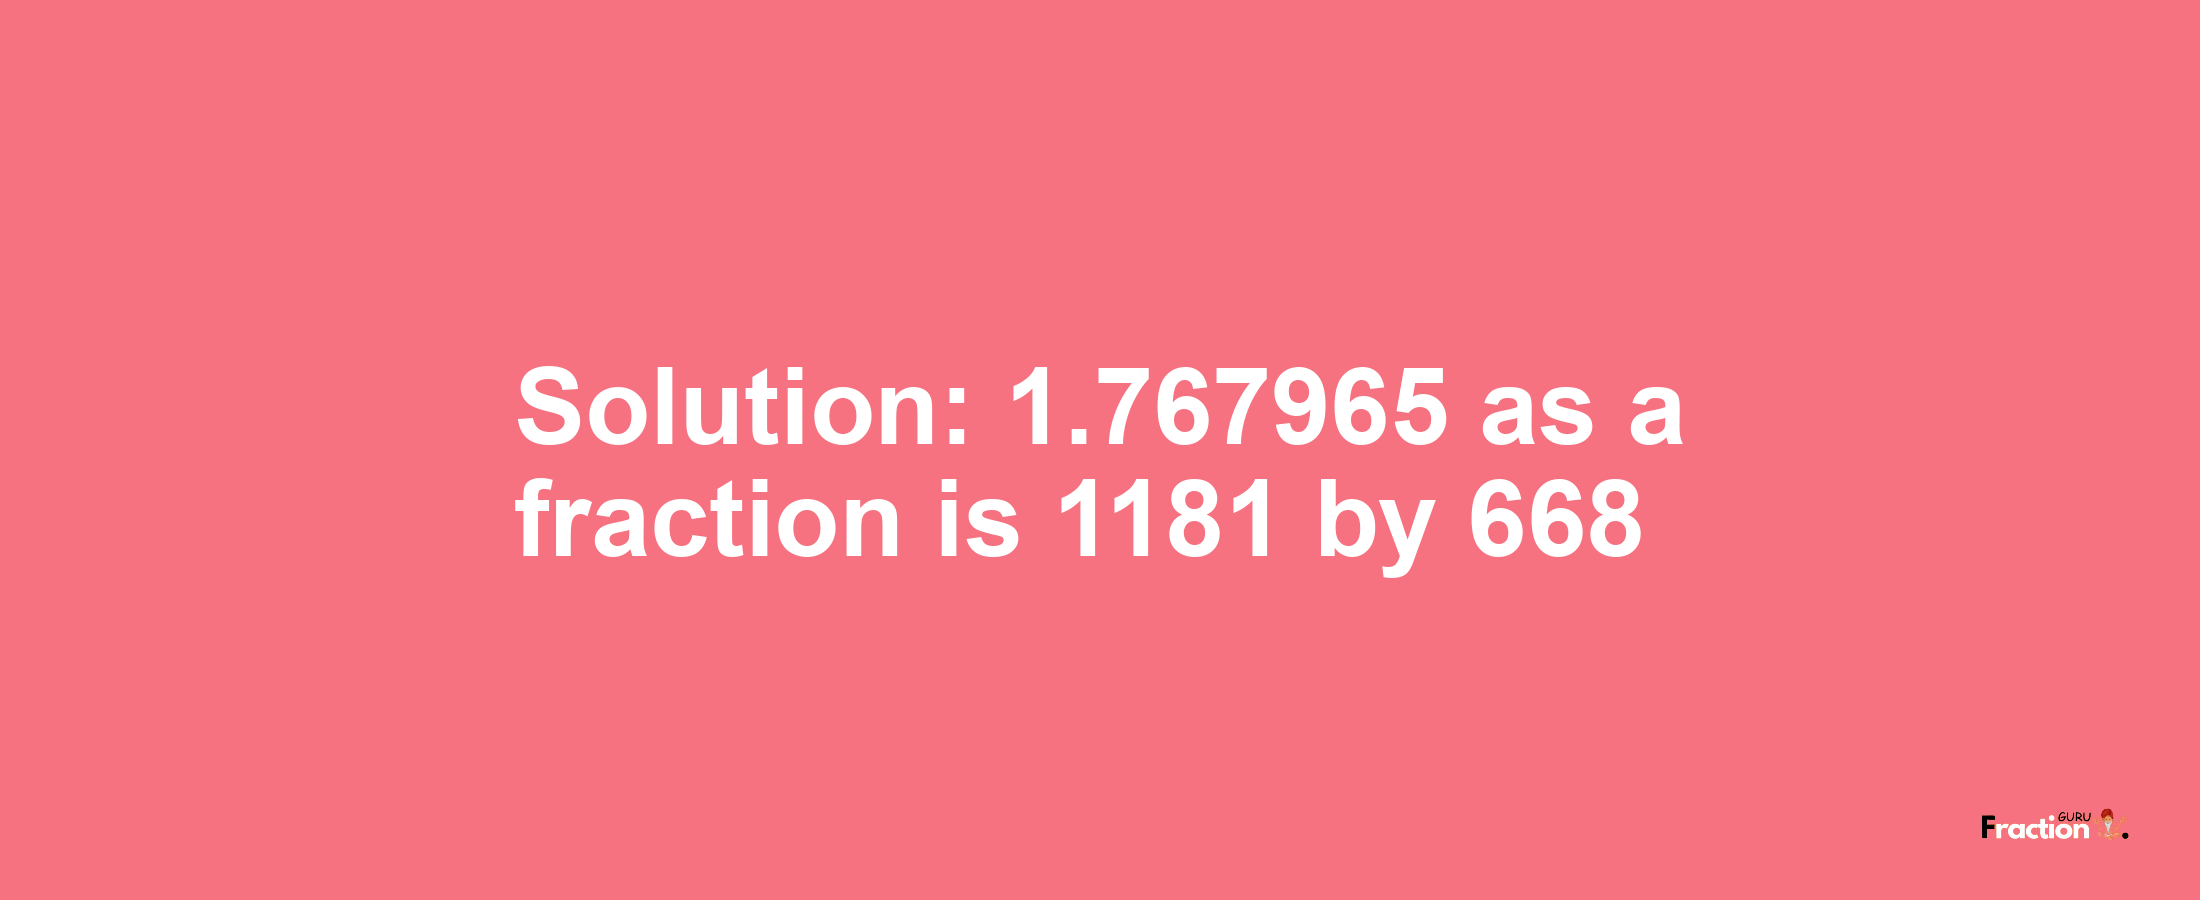 Solution:1.767965 as a fraction is 1181/668